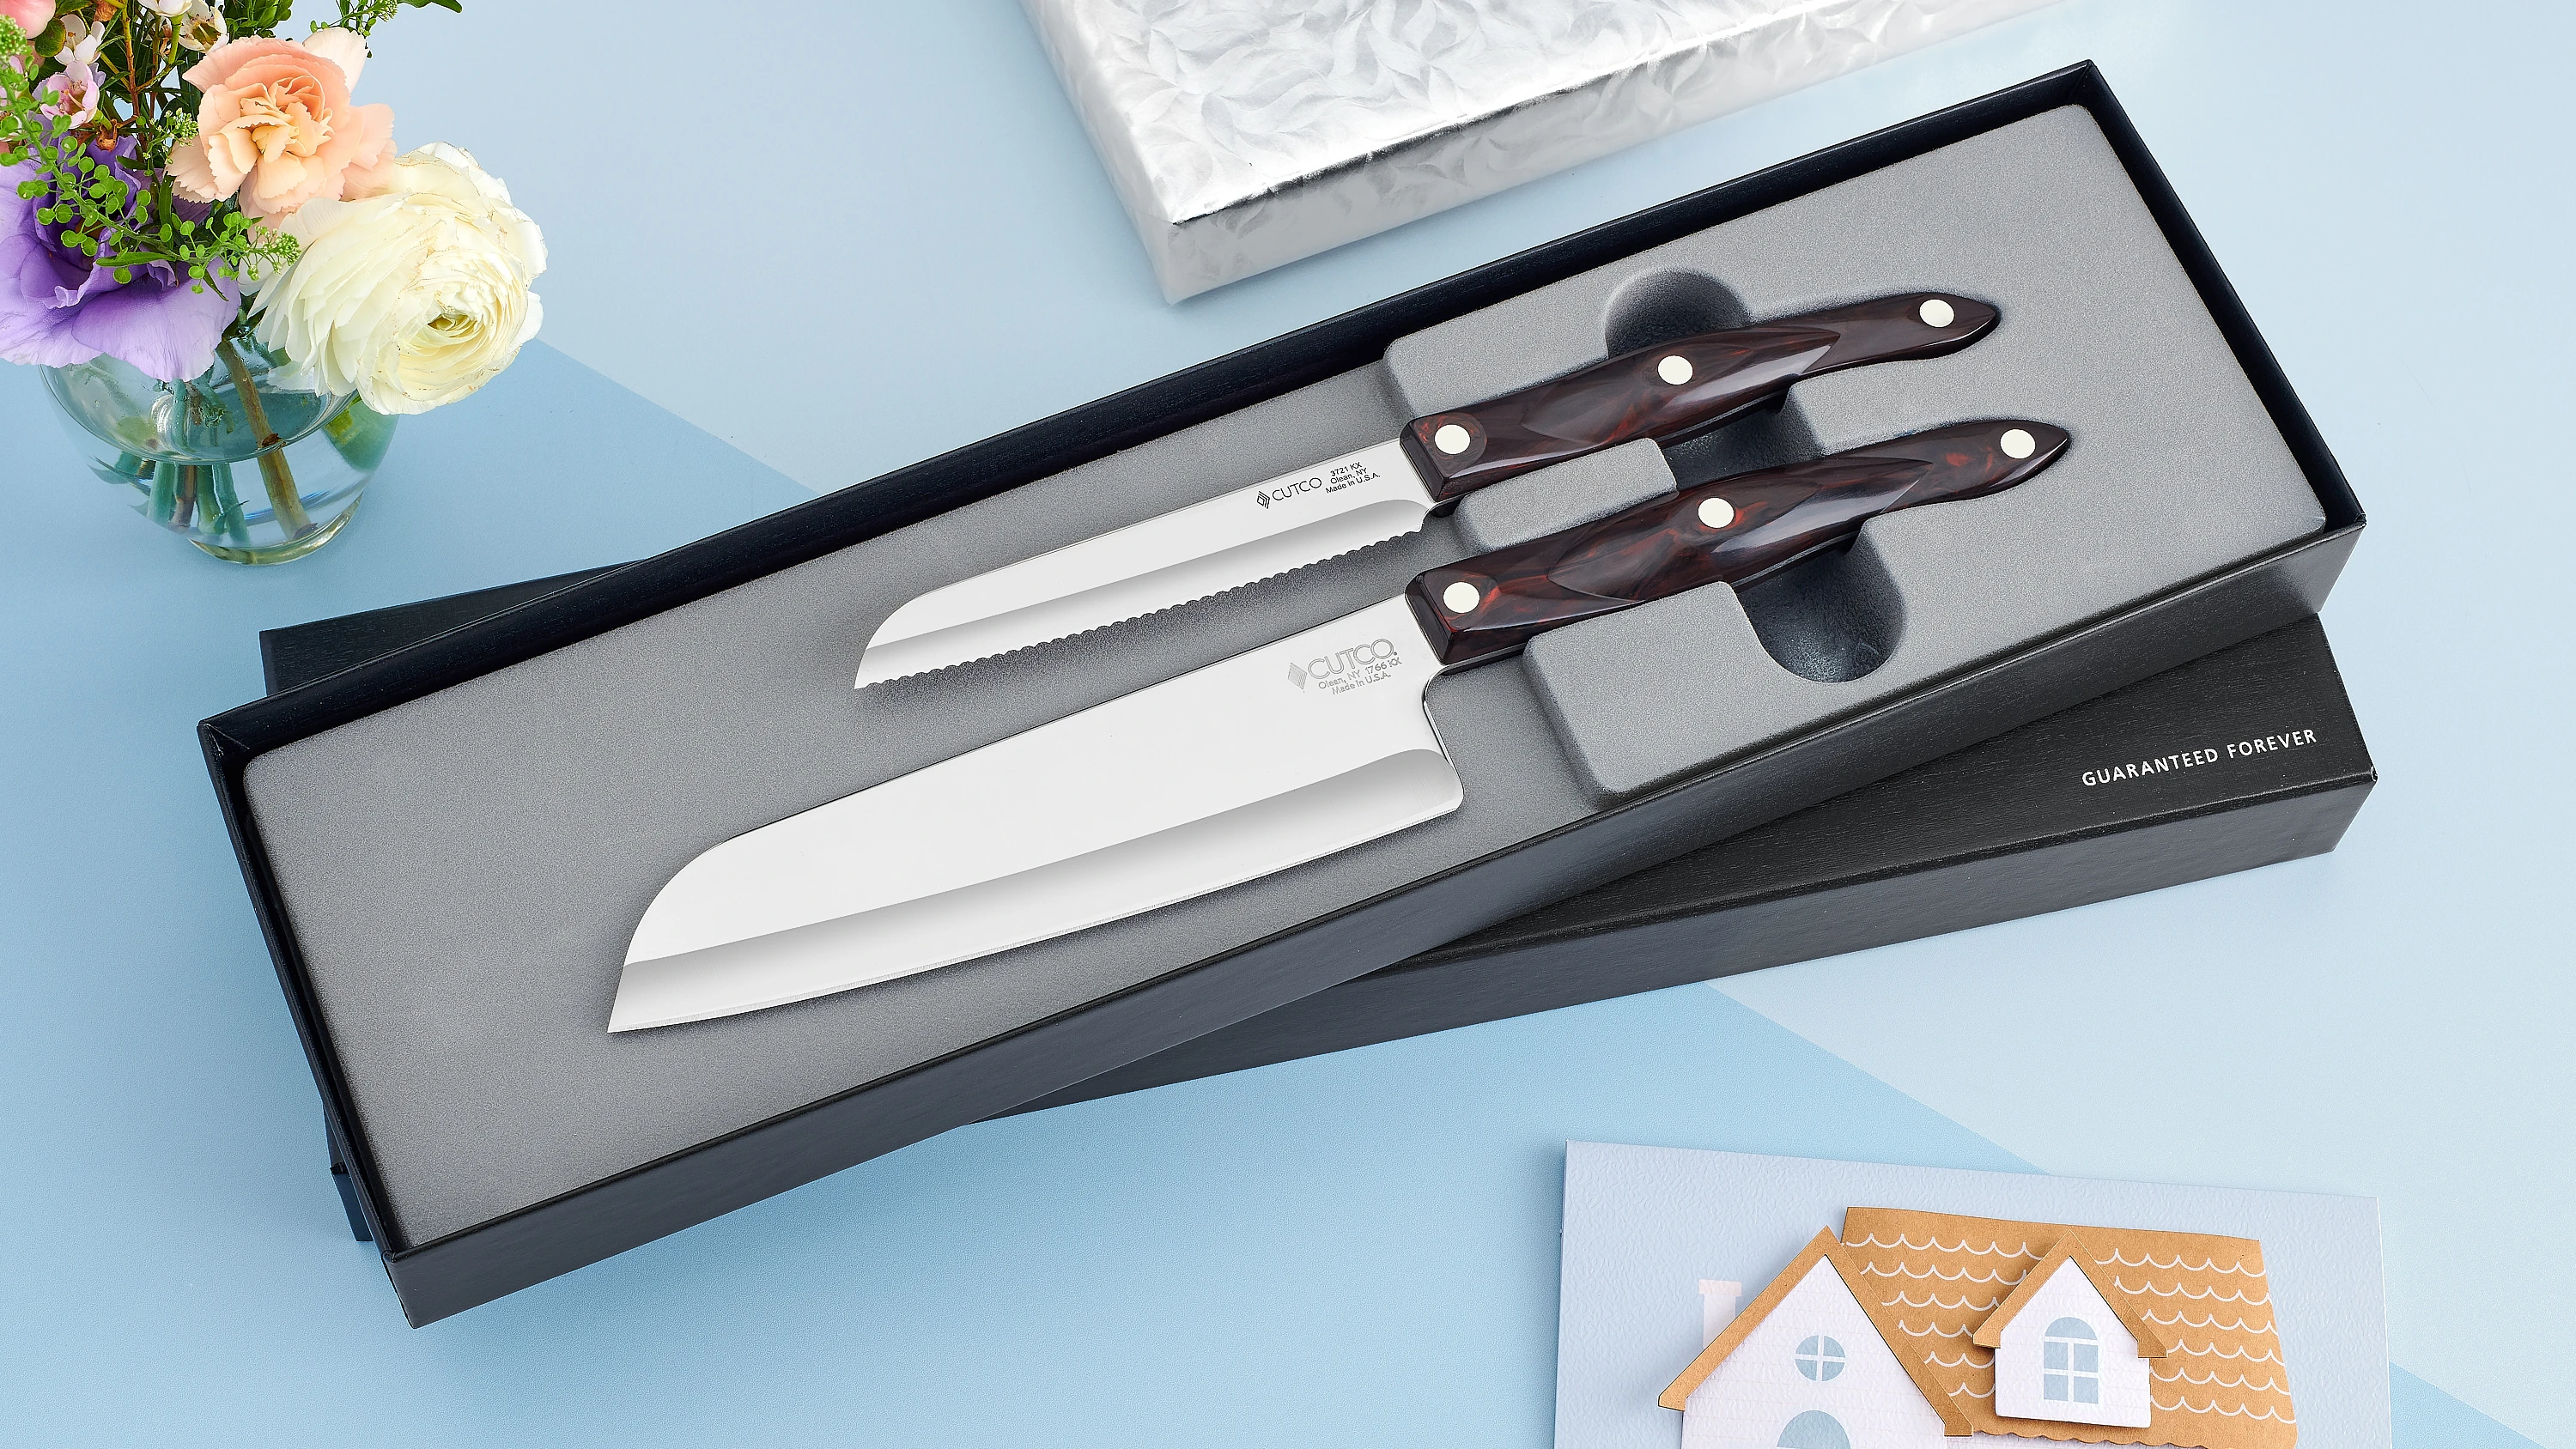 Santoku-Style Cook’s Combo in Gift Box